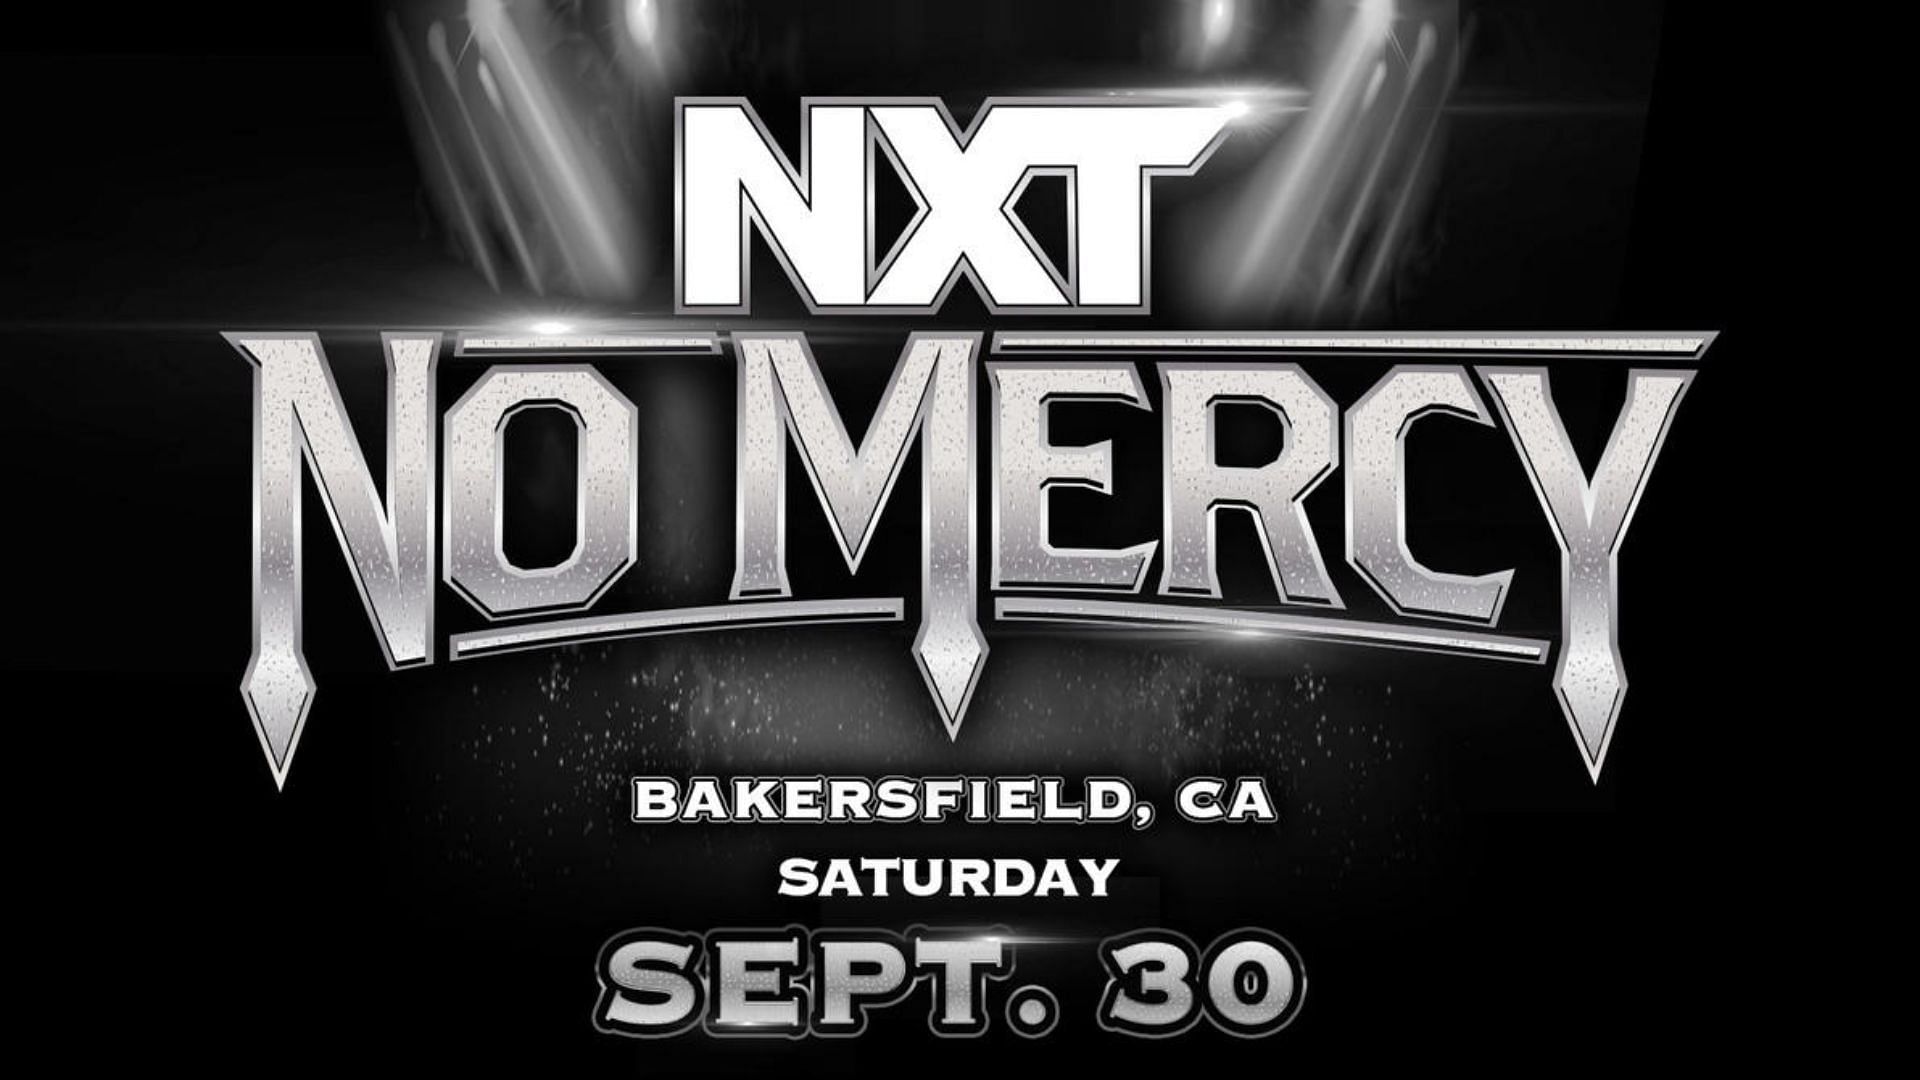 WWE No Mercy will take place in Bakersfield!